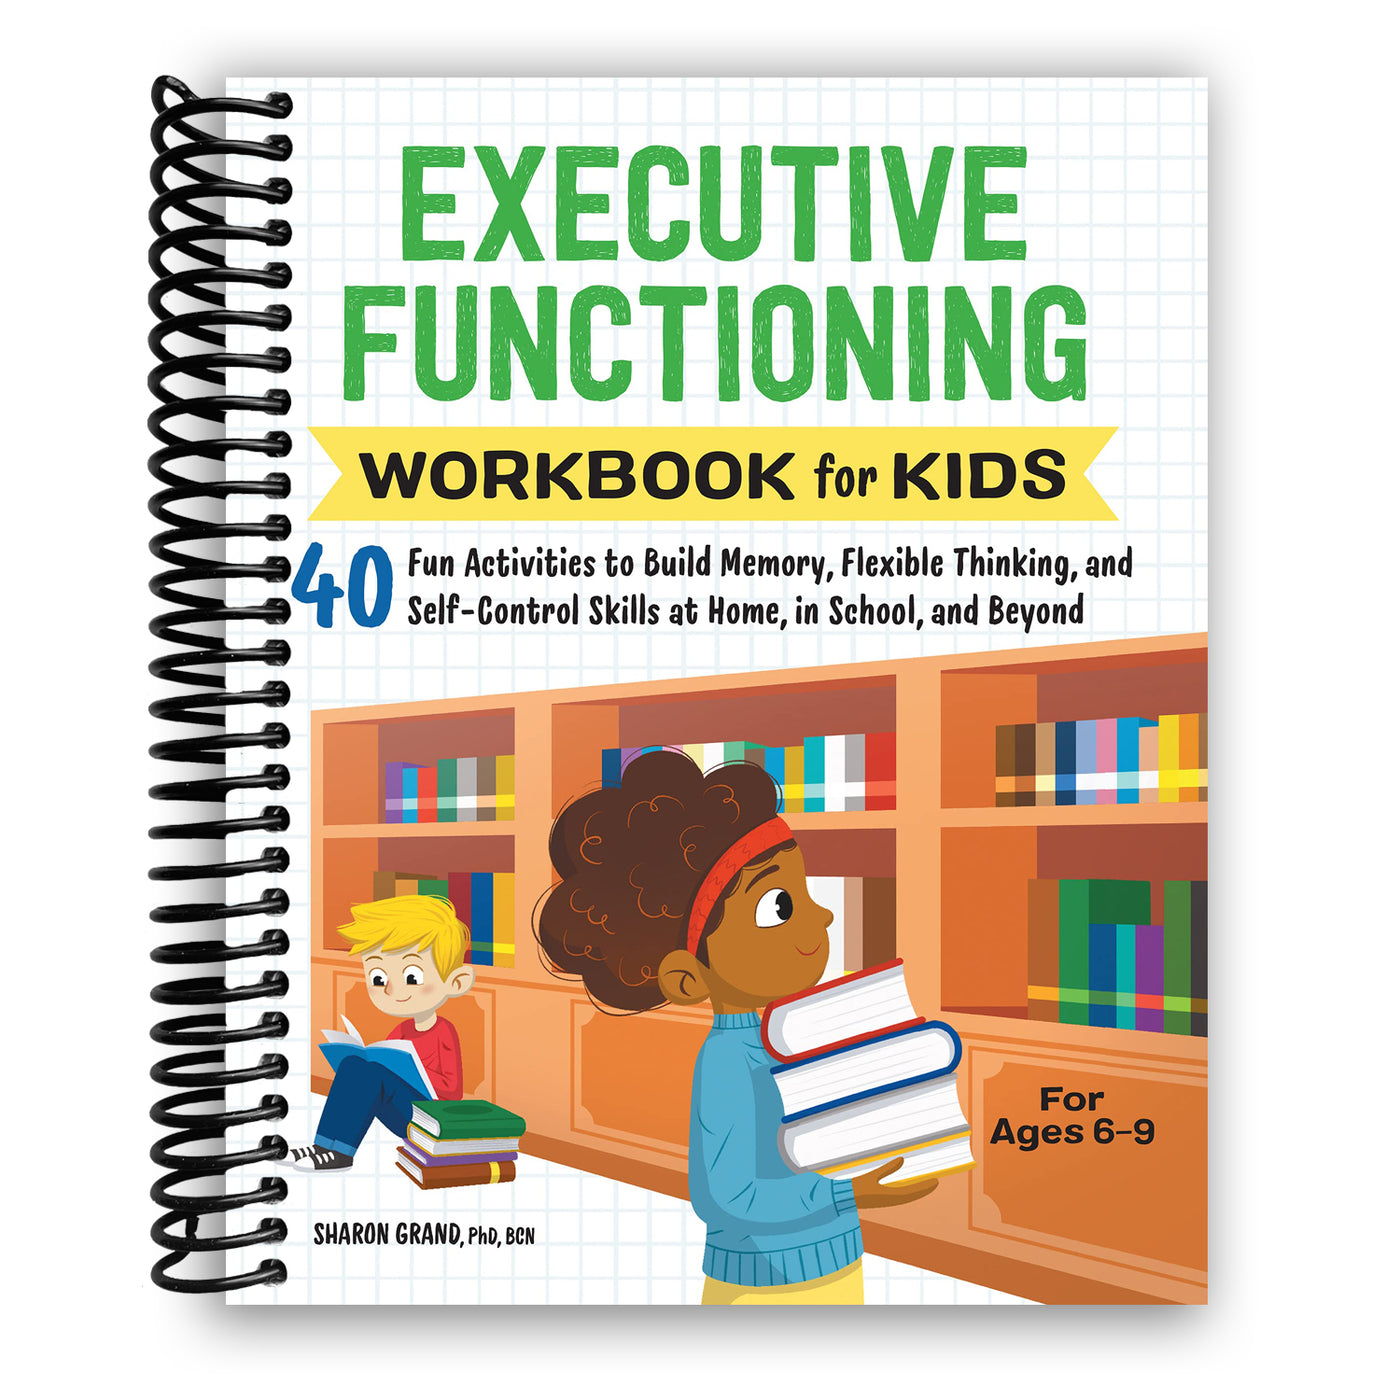 Executive Functioning Workbook for Kids: 40 Fun Activities to Build Memory, Flexible Thinking, and Self-Control Skills (Spiral Bound)